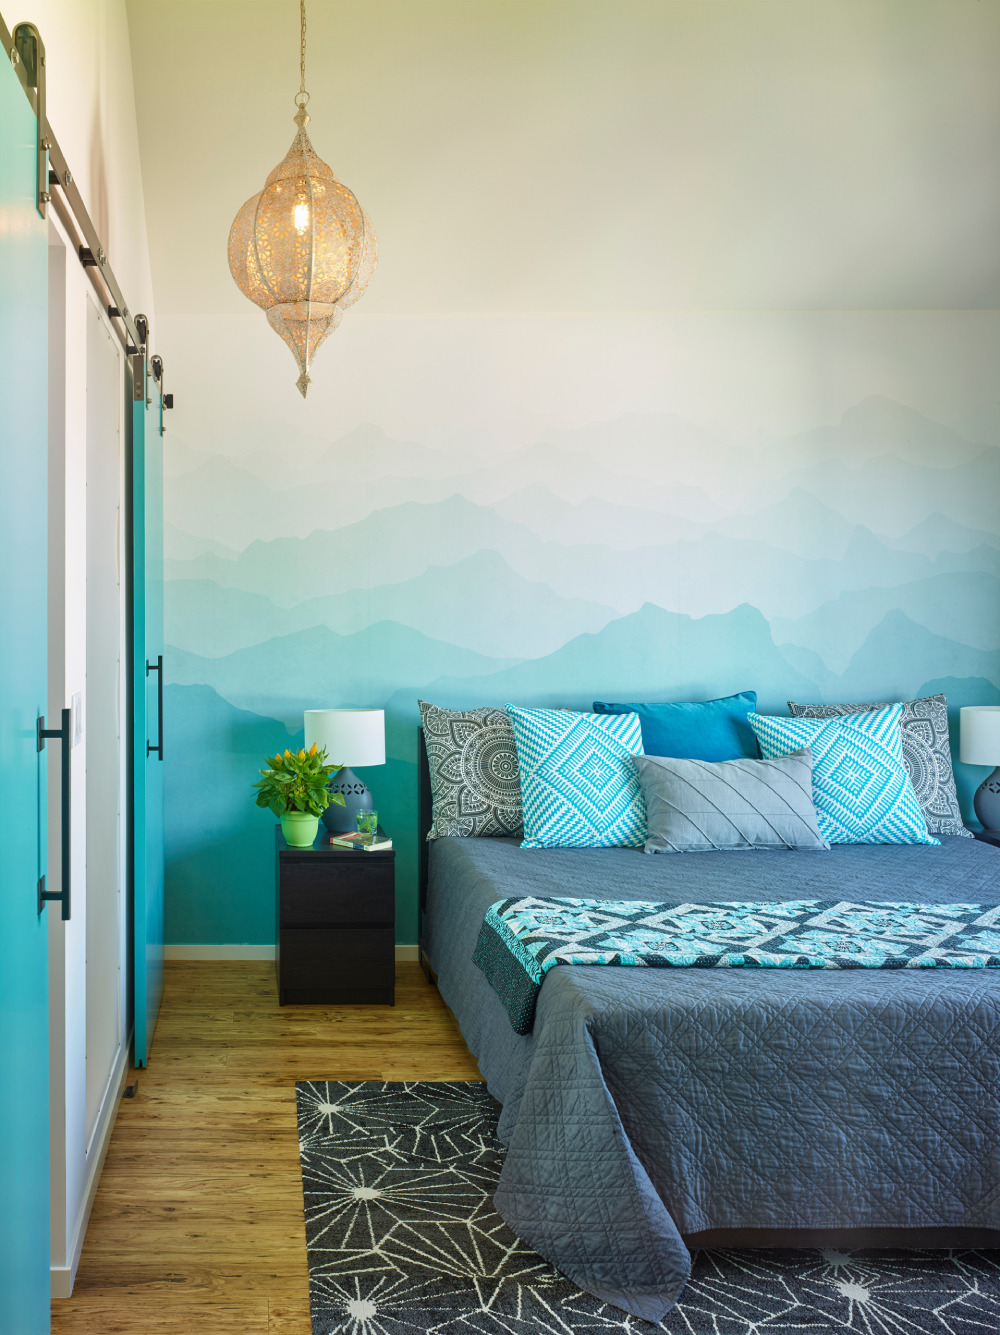 1-37-4 Colors That Go With Turquoise for a Room Decor